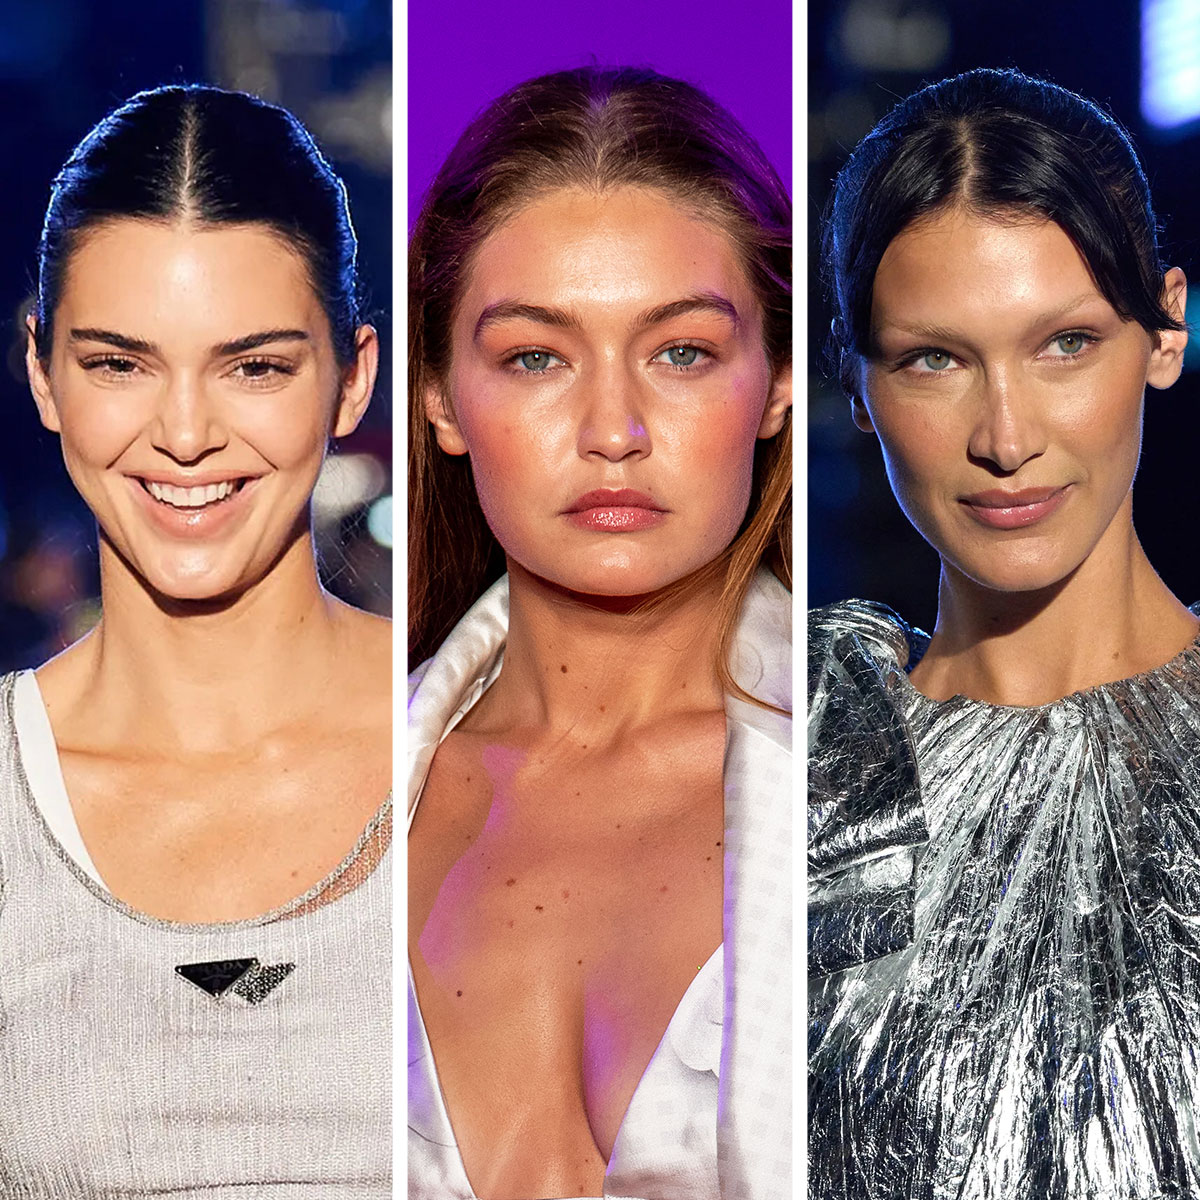 Bella and Gigi Hadid rock super controversial beauty trend on